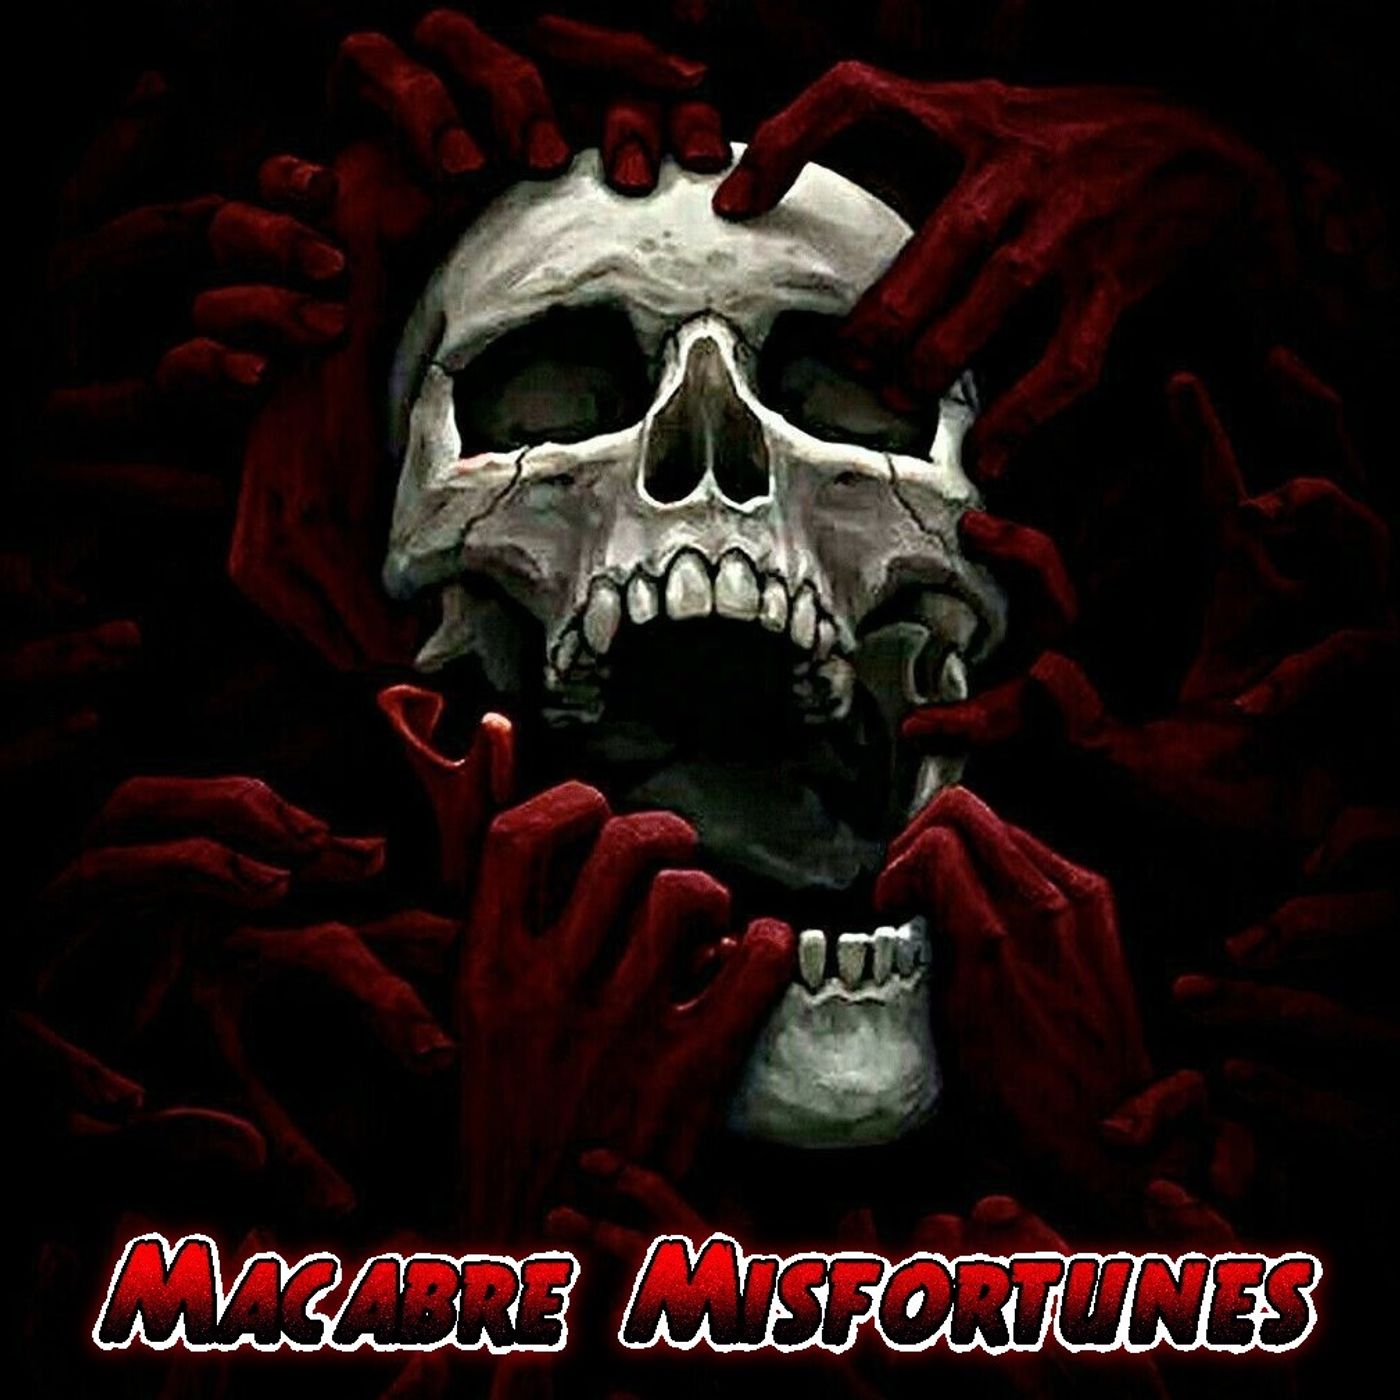 HHS Presents Macabre Misfortunes Ep 104 A Different Kind of Black Death